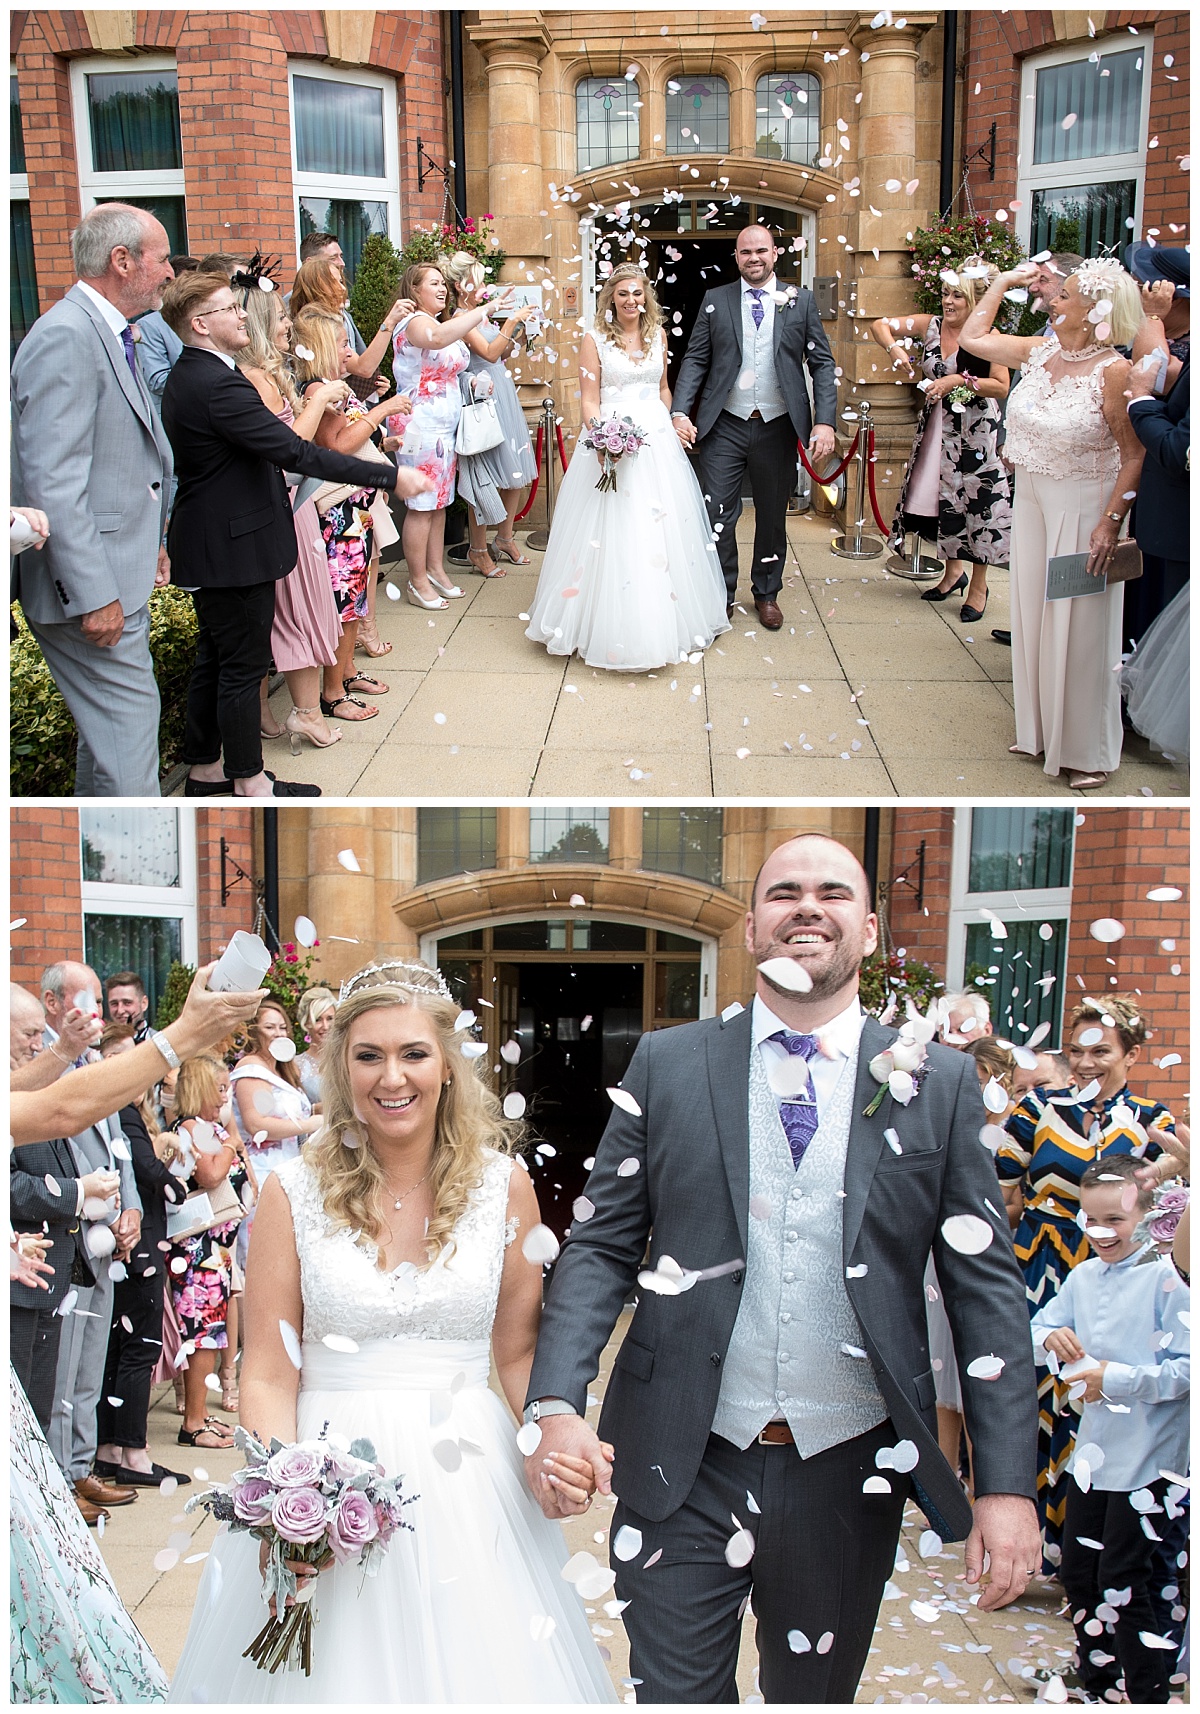 Wedding Photography Manchester - Sam and James's Cheadle House Wedding 46